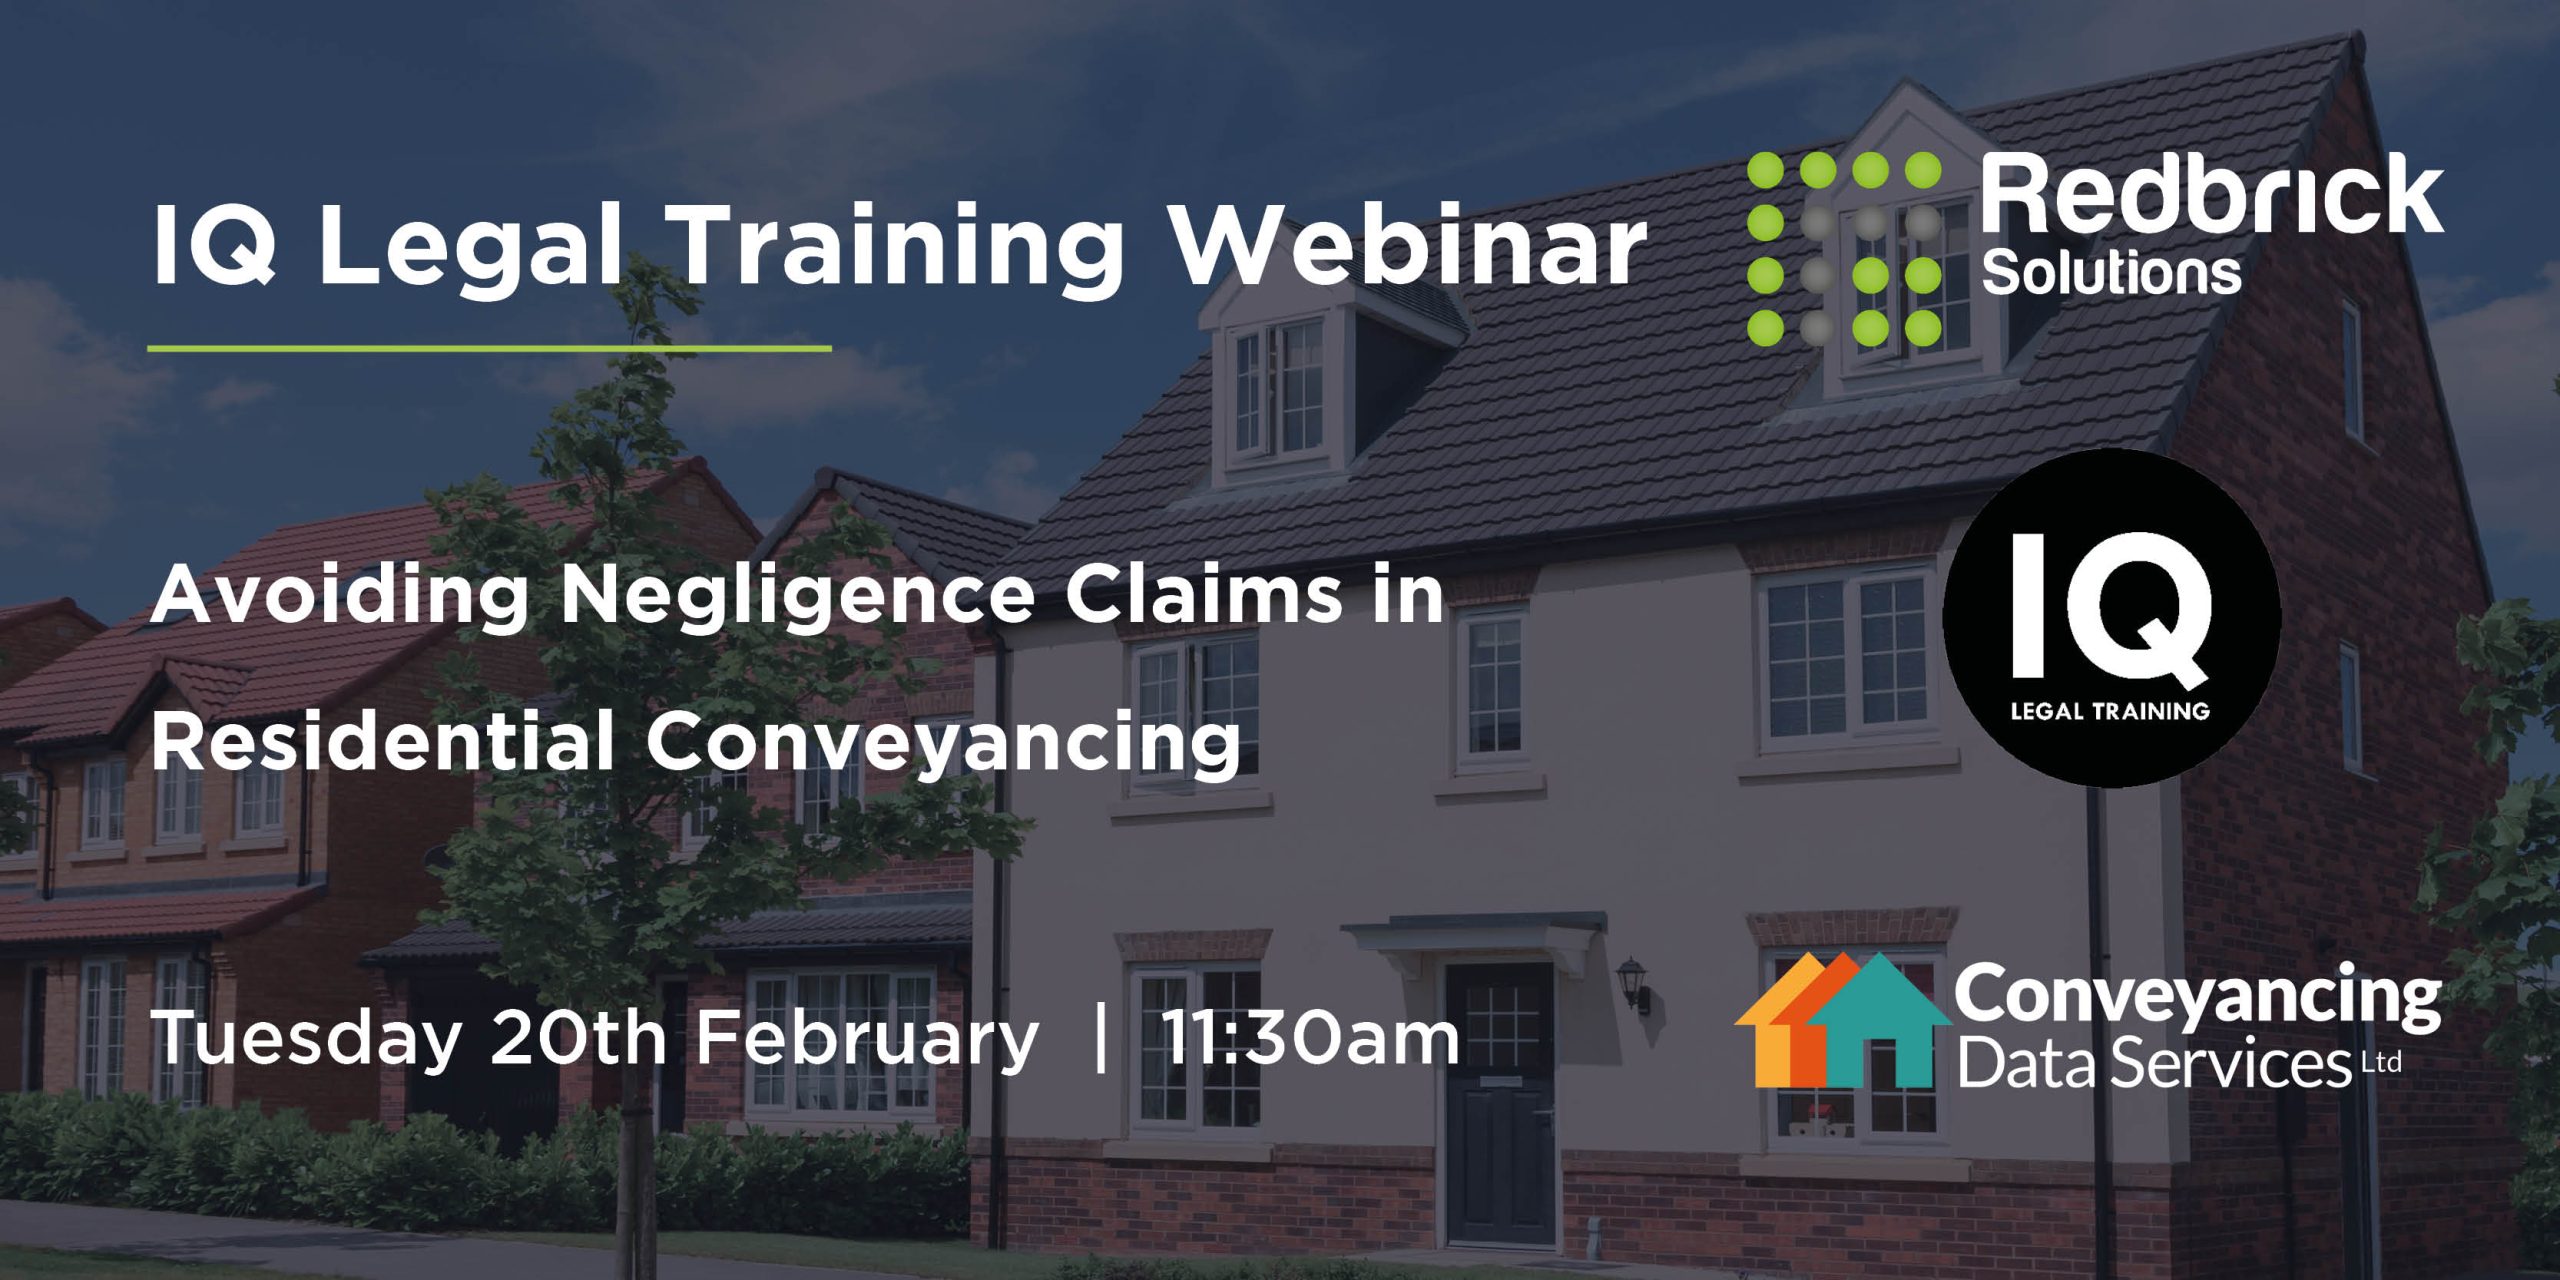 IQ Legal Training Webinar | Avoiding Negligence Claims in Residential Conveyancing